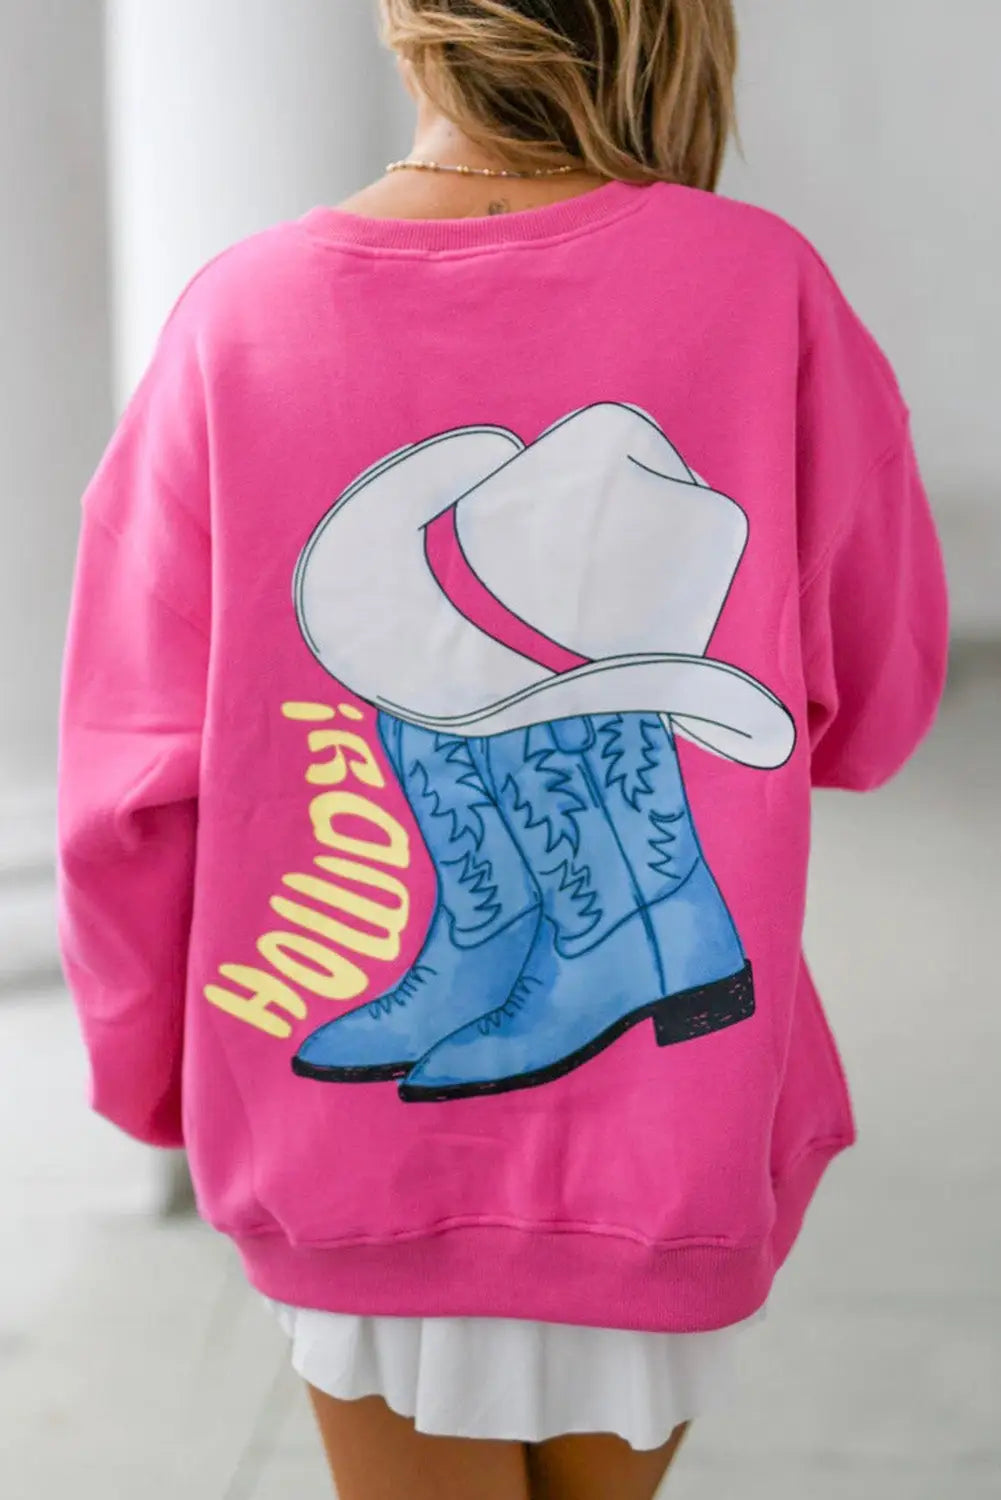 Strawberry pink howdy back western graphic pullover sweatshirt - l / 62.7% polyester + 37.3% cotton - sweatshirts &